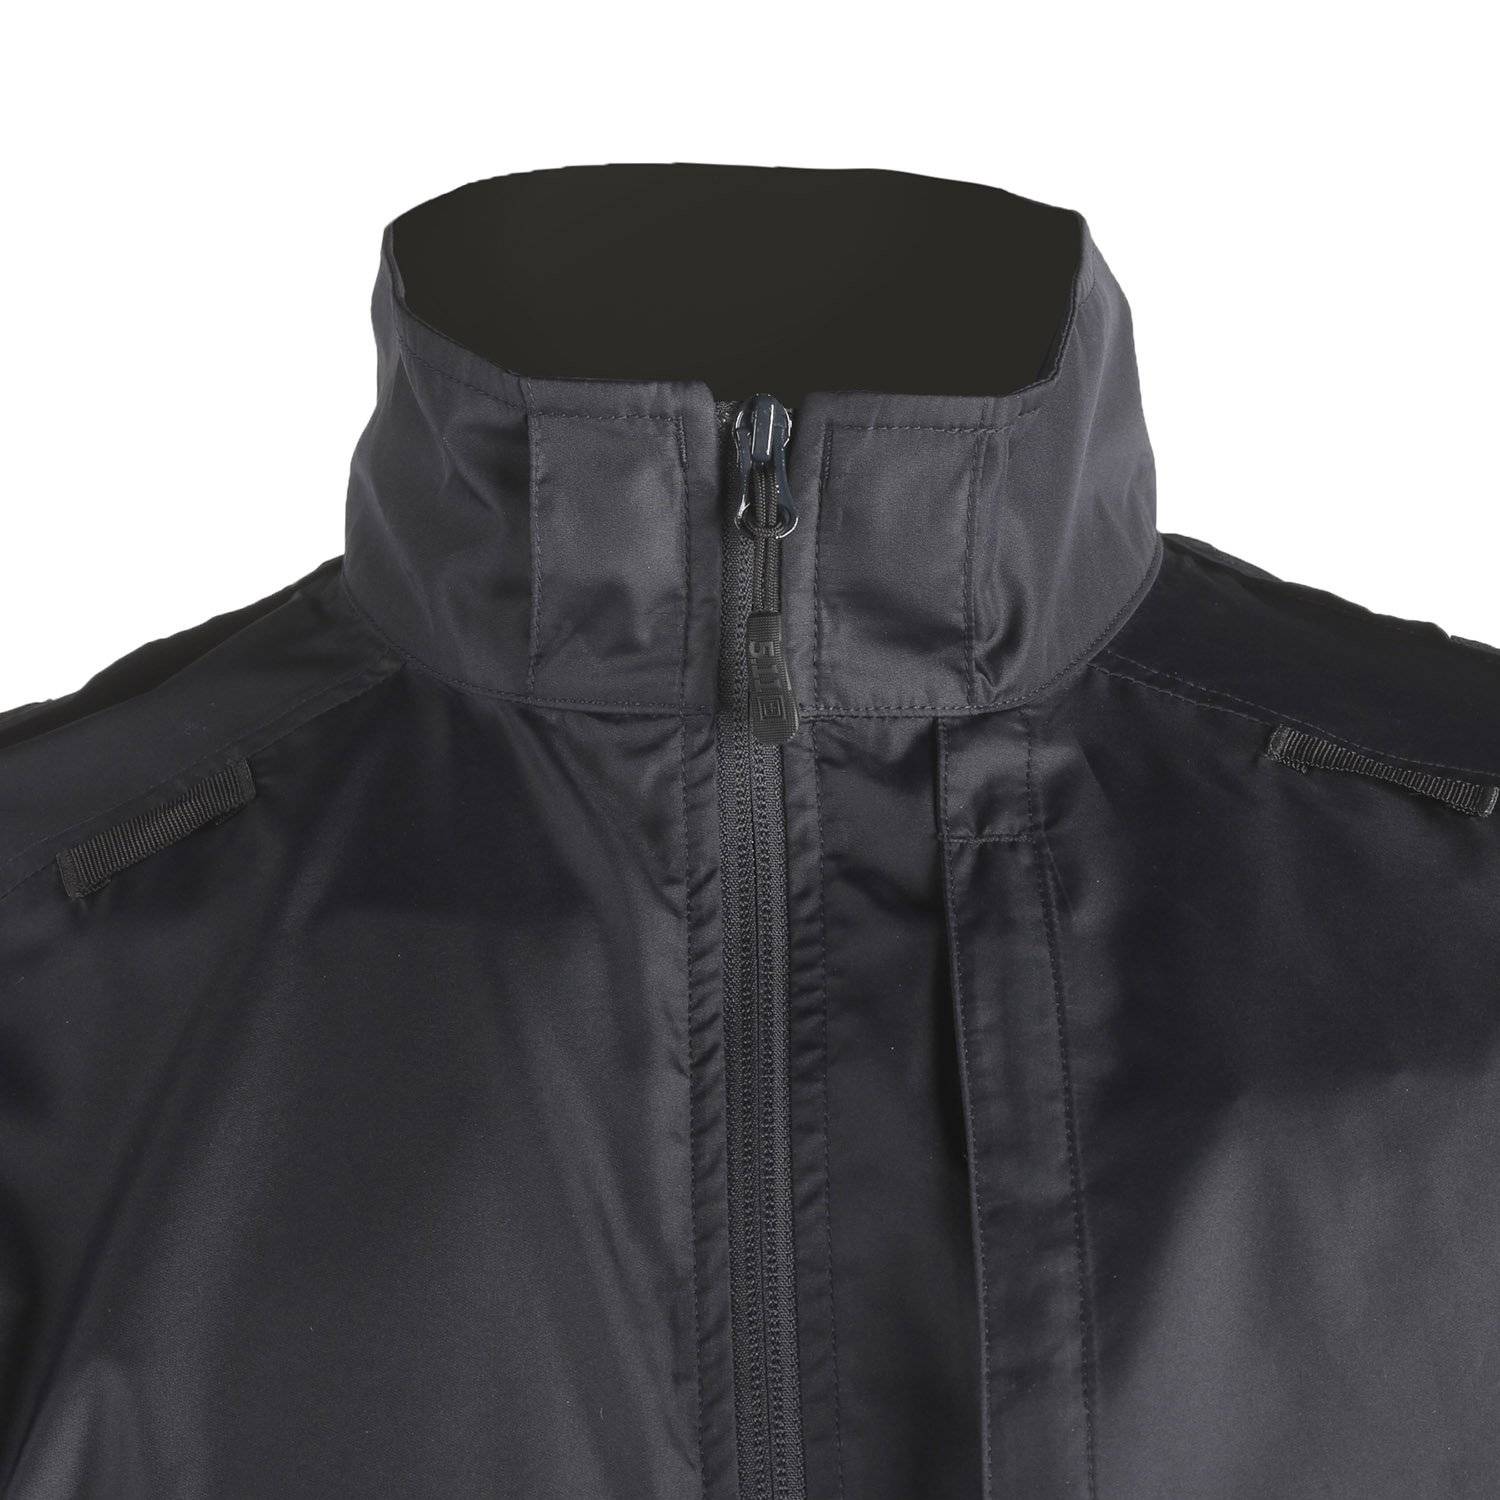 5.11 Tactical Packable Operator Jacket